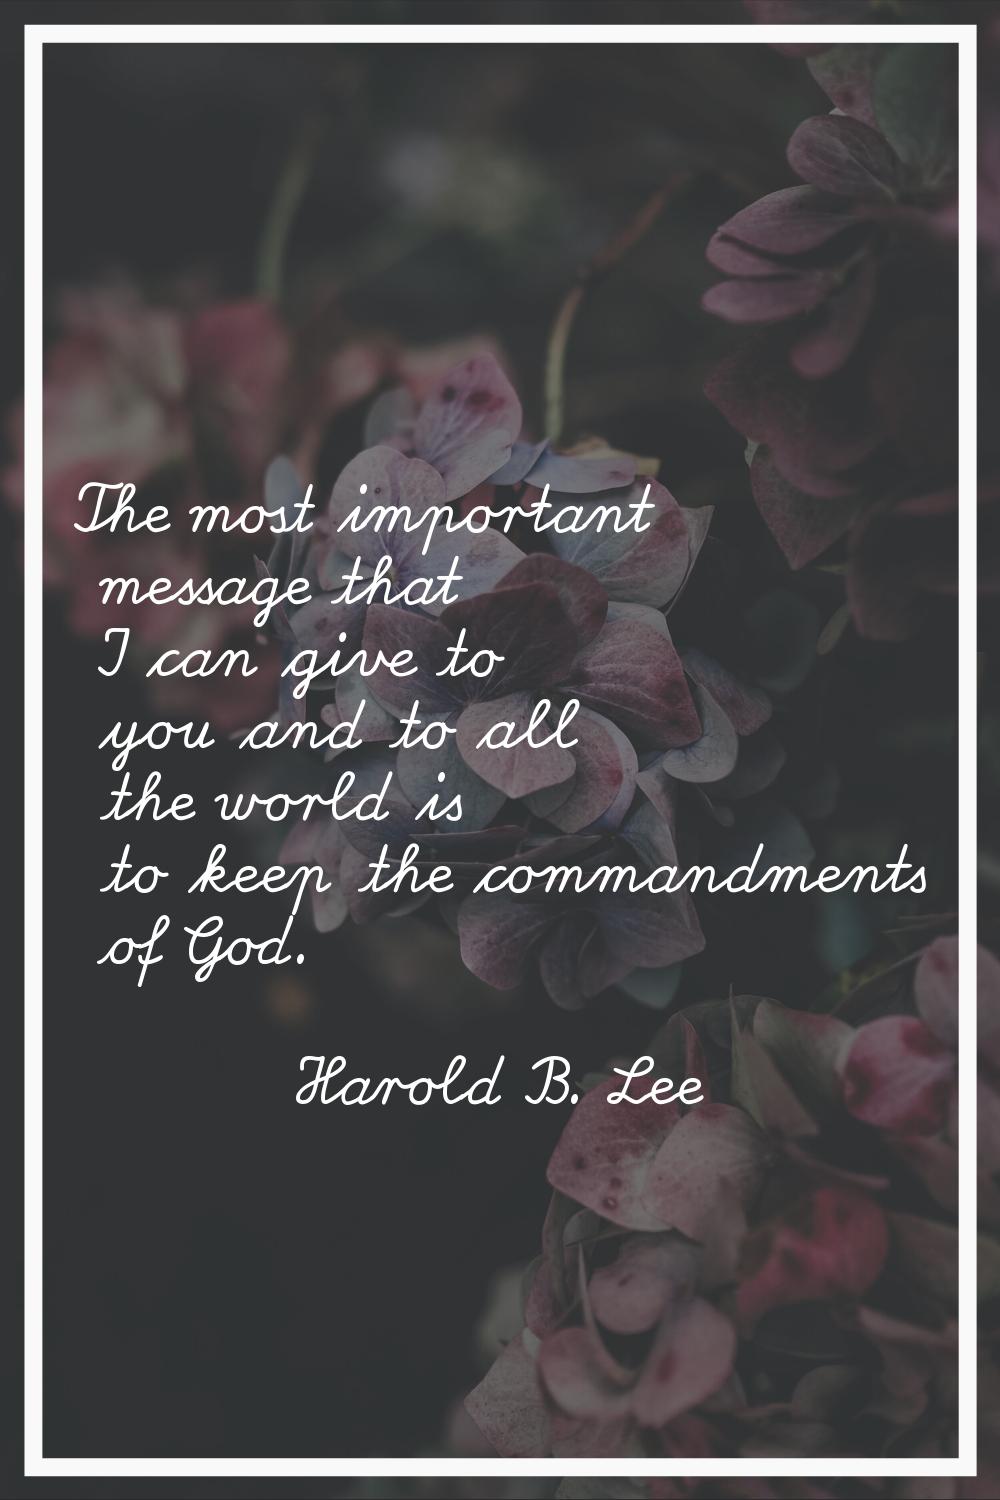 The most important message that I can give to you and to all the world is to keep the commandments 